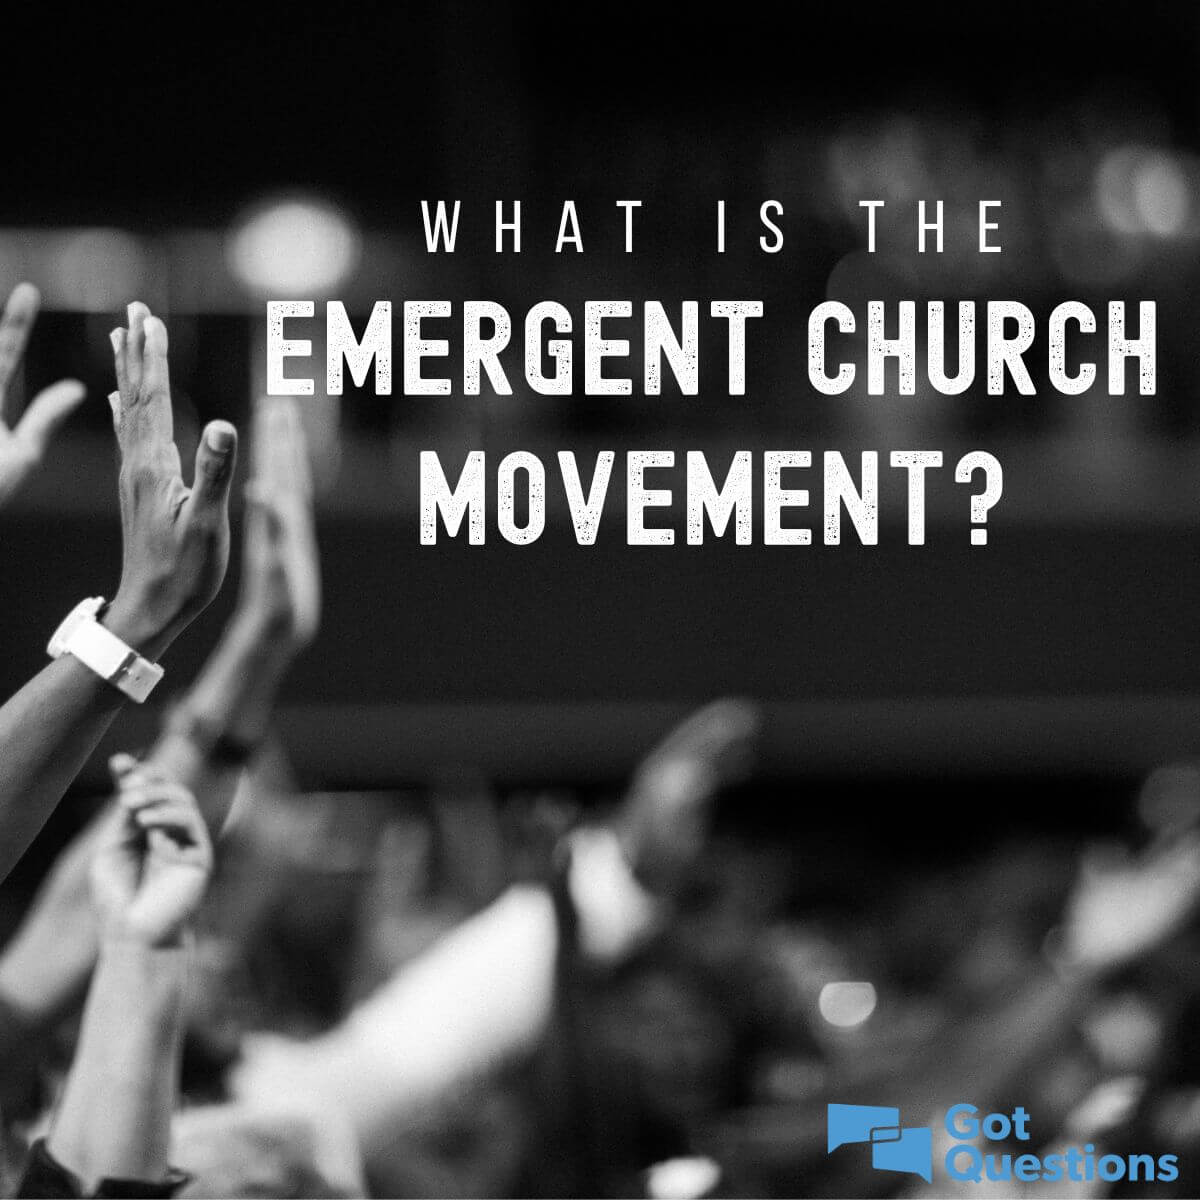 What is the emerging / emergent church movement?